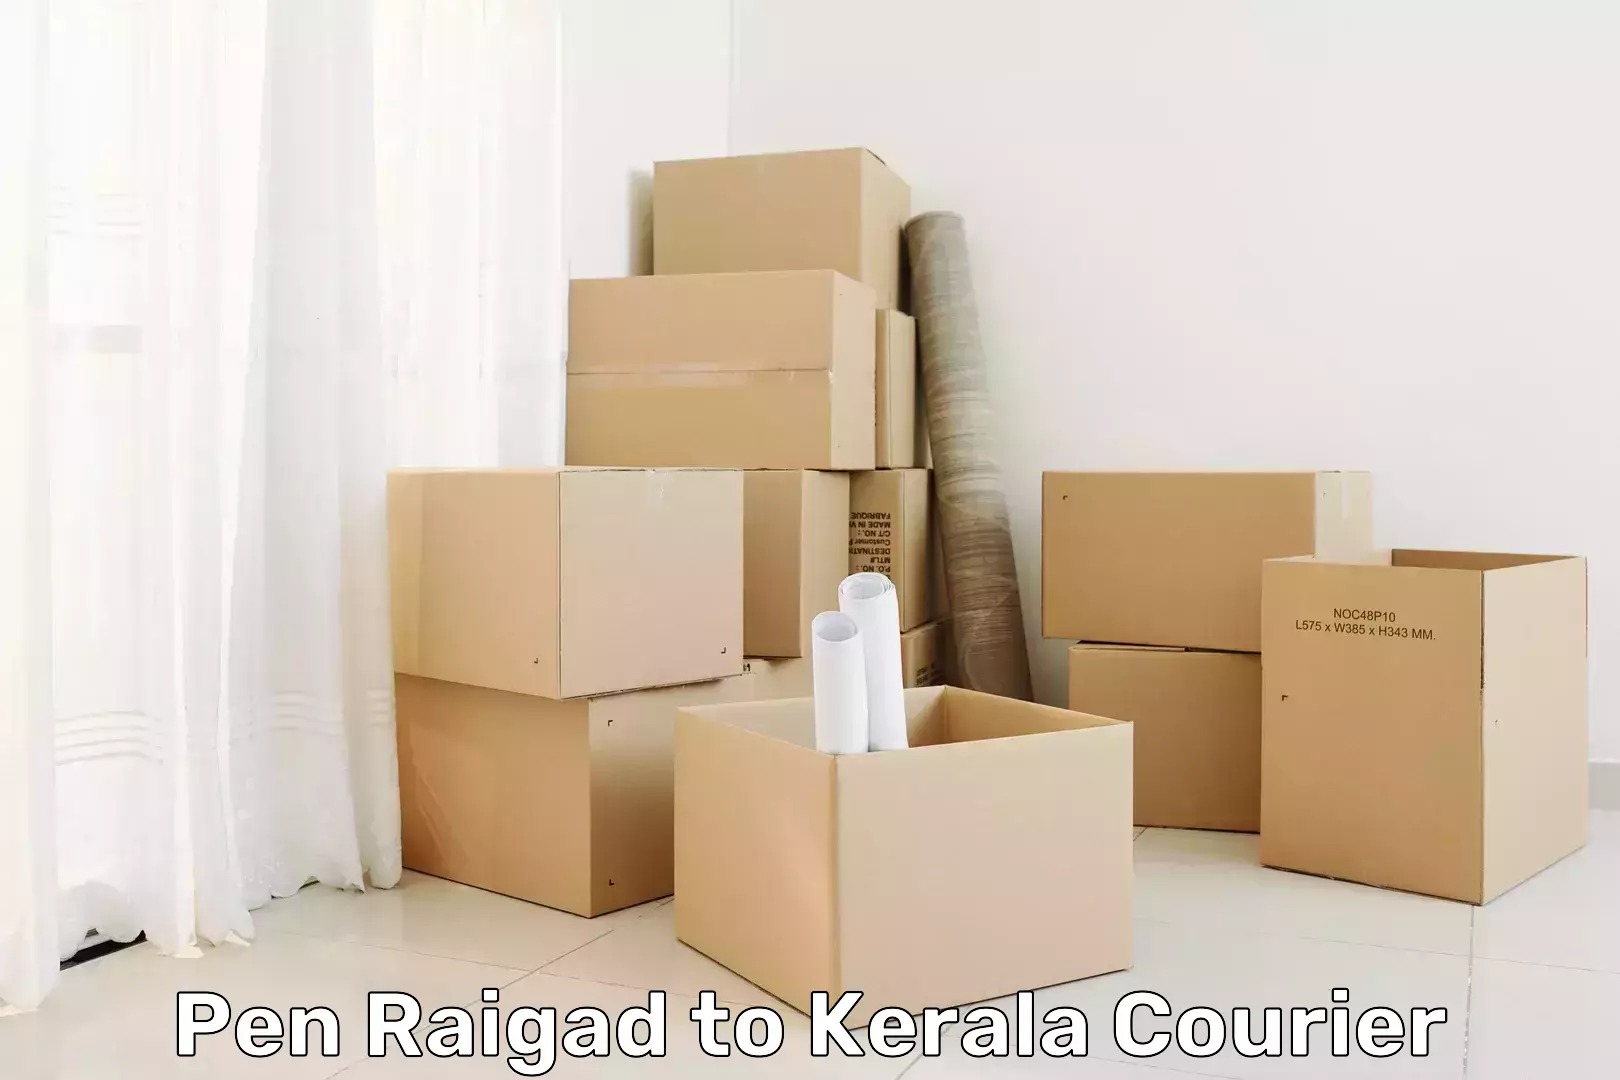 State-of-the-art courier technology Pen Raigad to Ernakulam